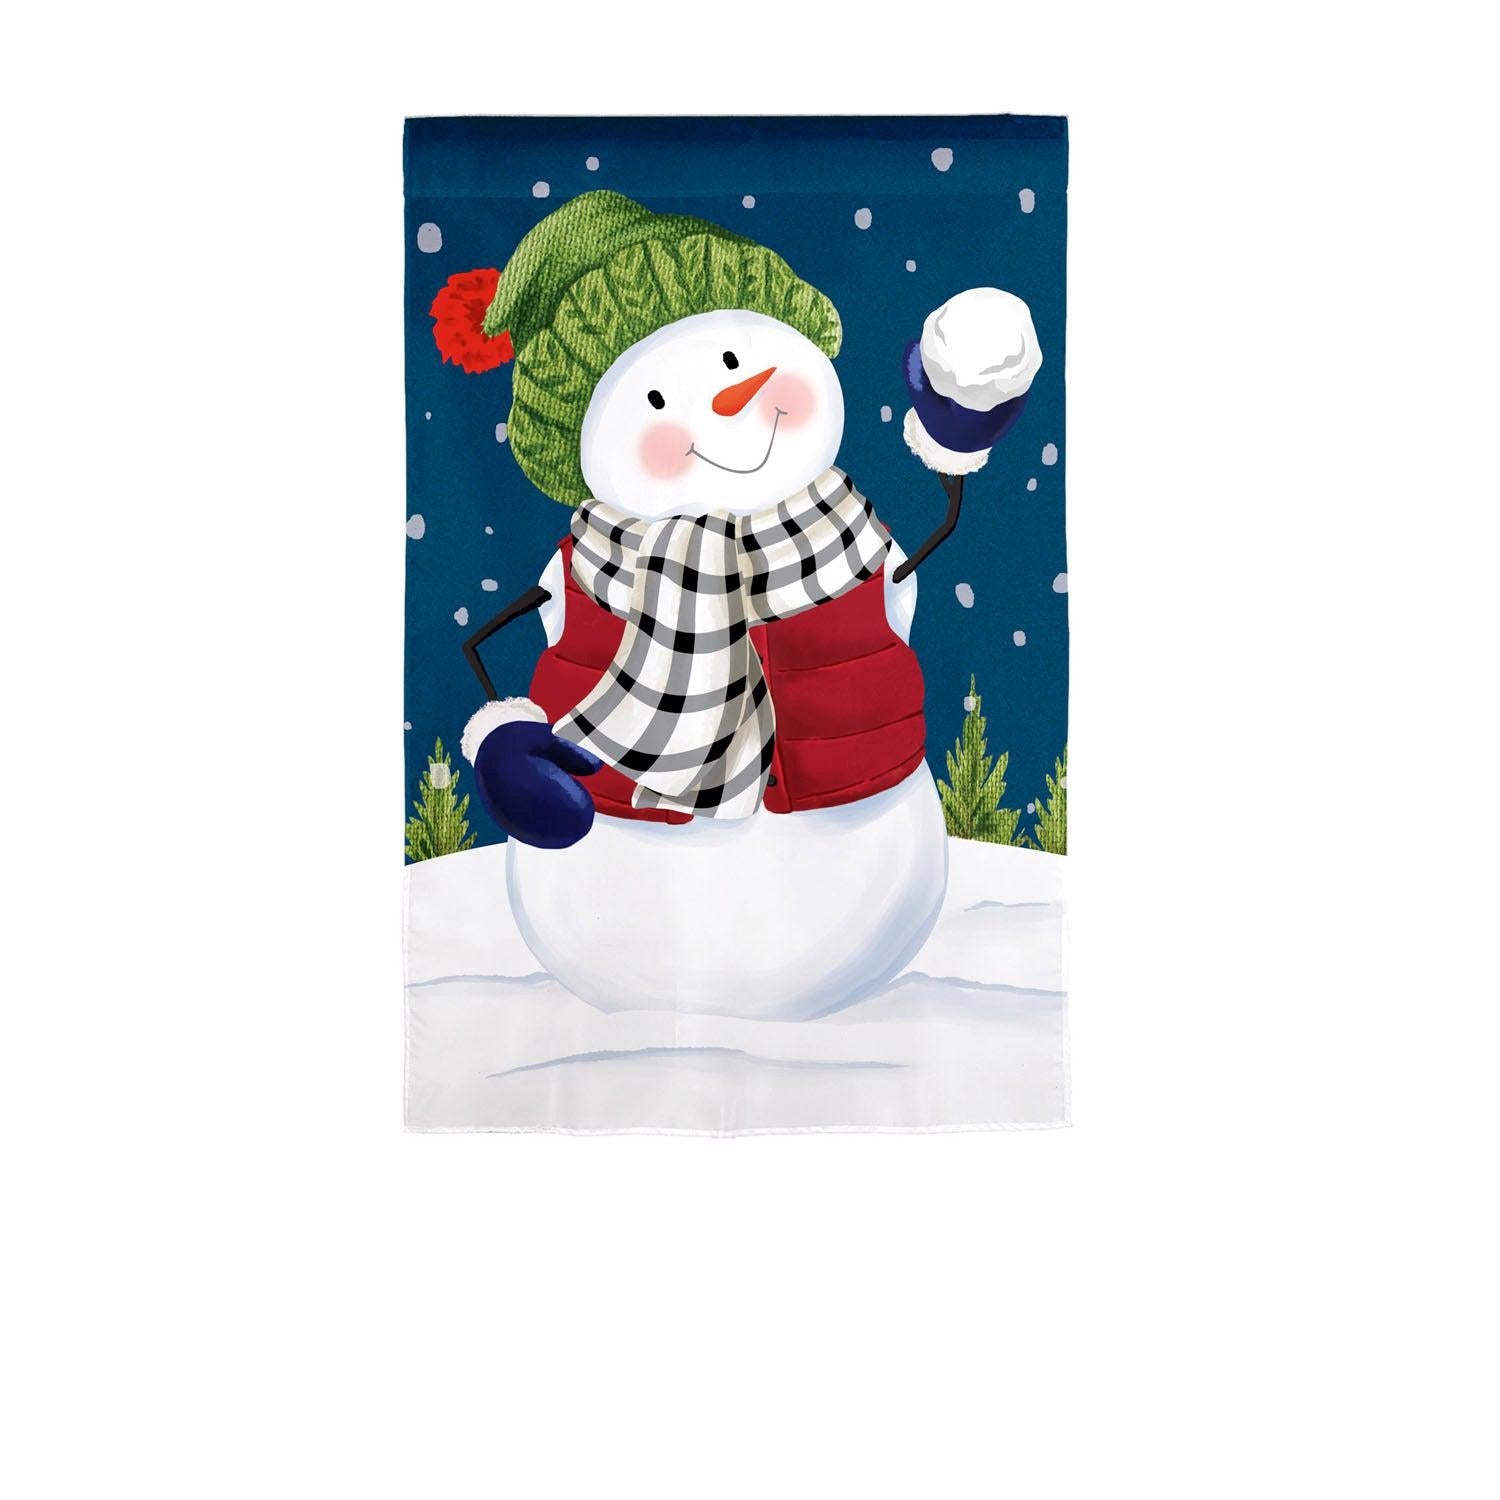 The Snow Fun house banner features a happy snowman preparing to toss a snowball. 